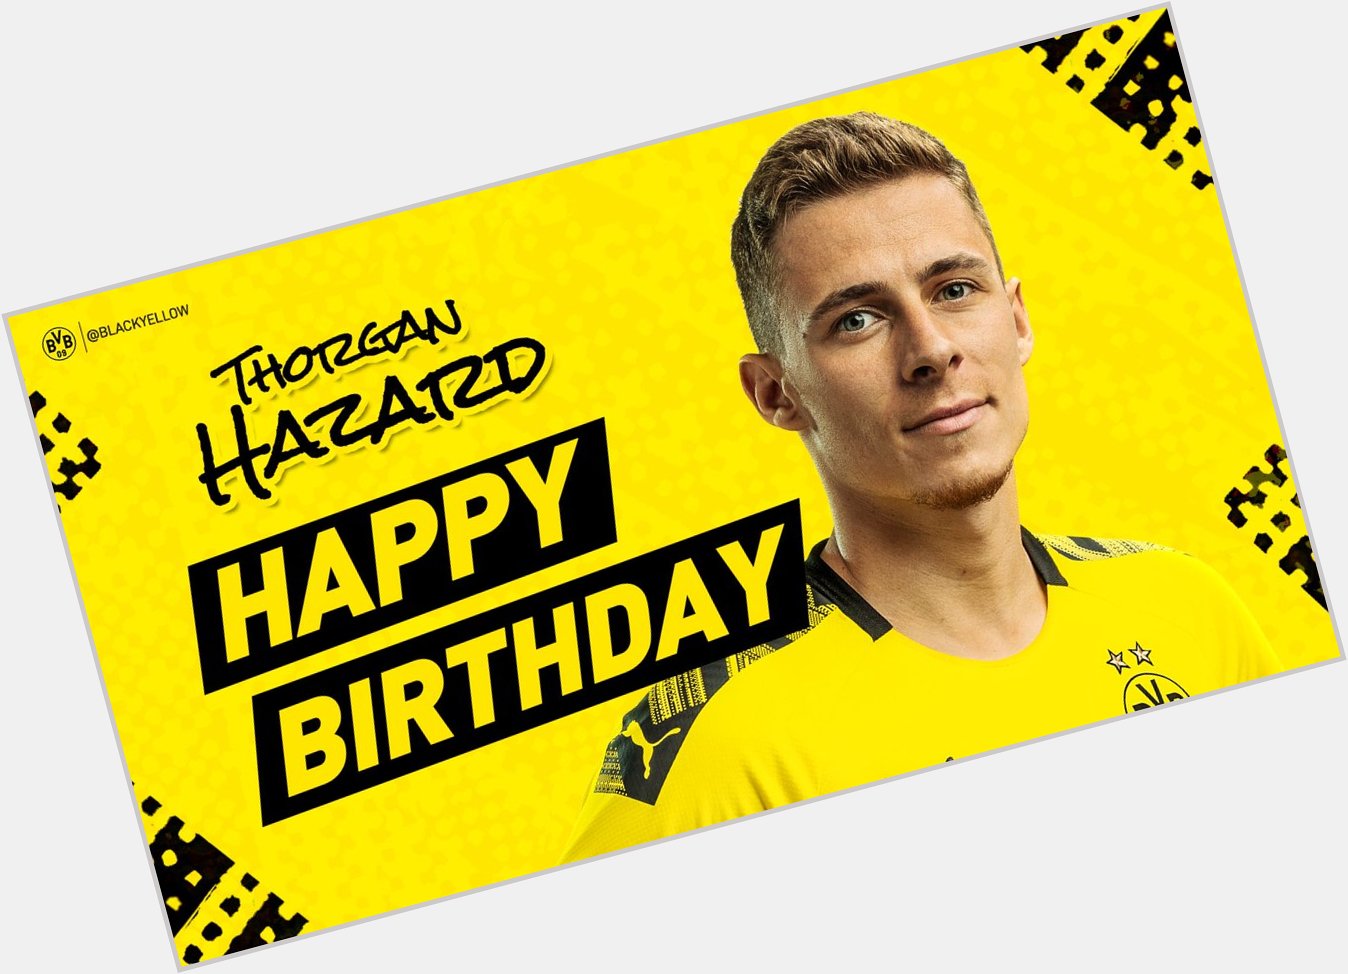 Happy Birthday to you, Thorgan Hazard! Have a great day and see you soon! 